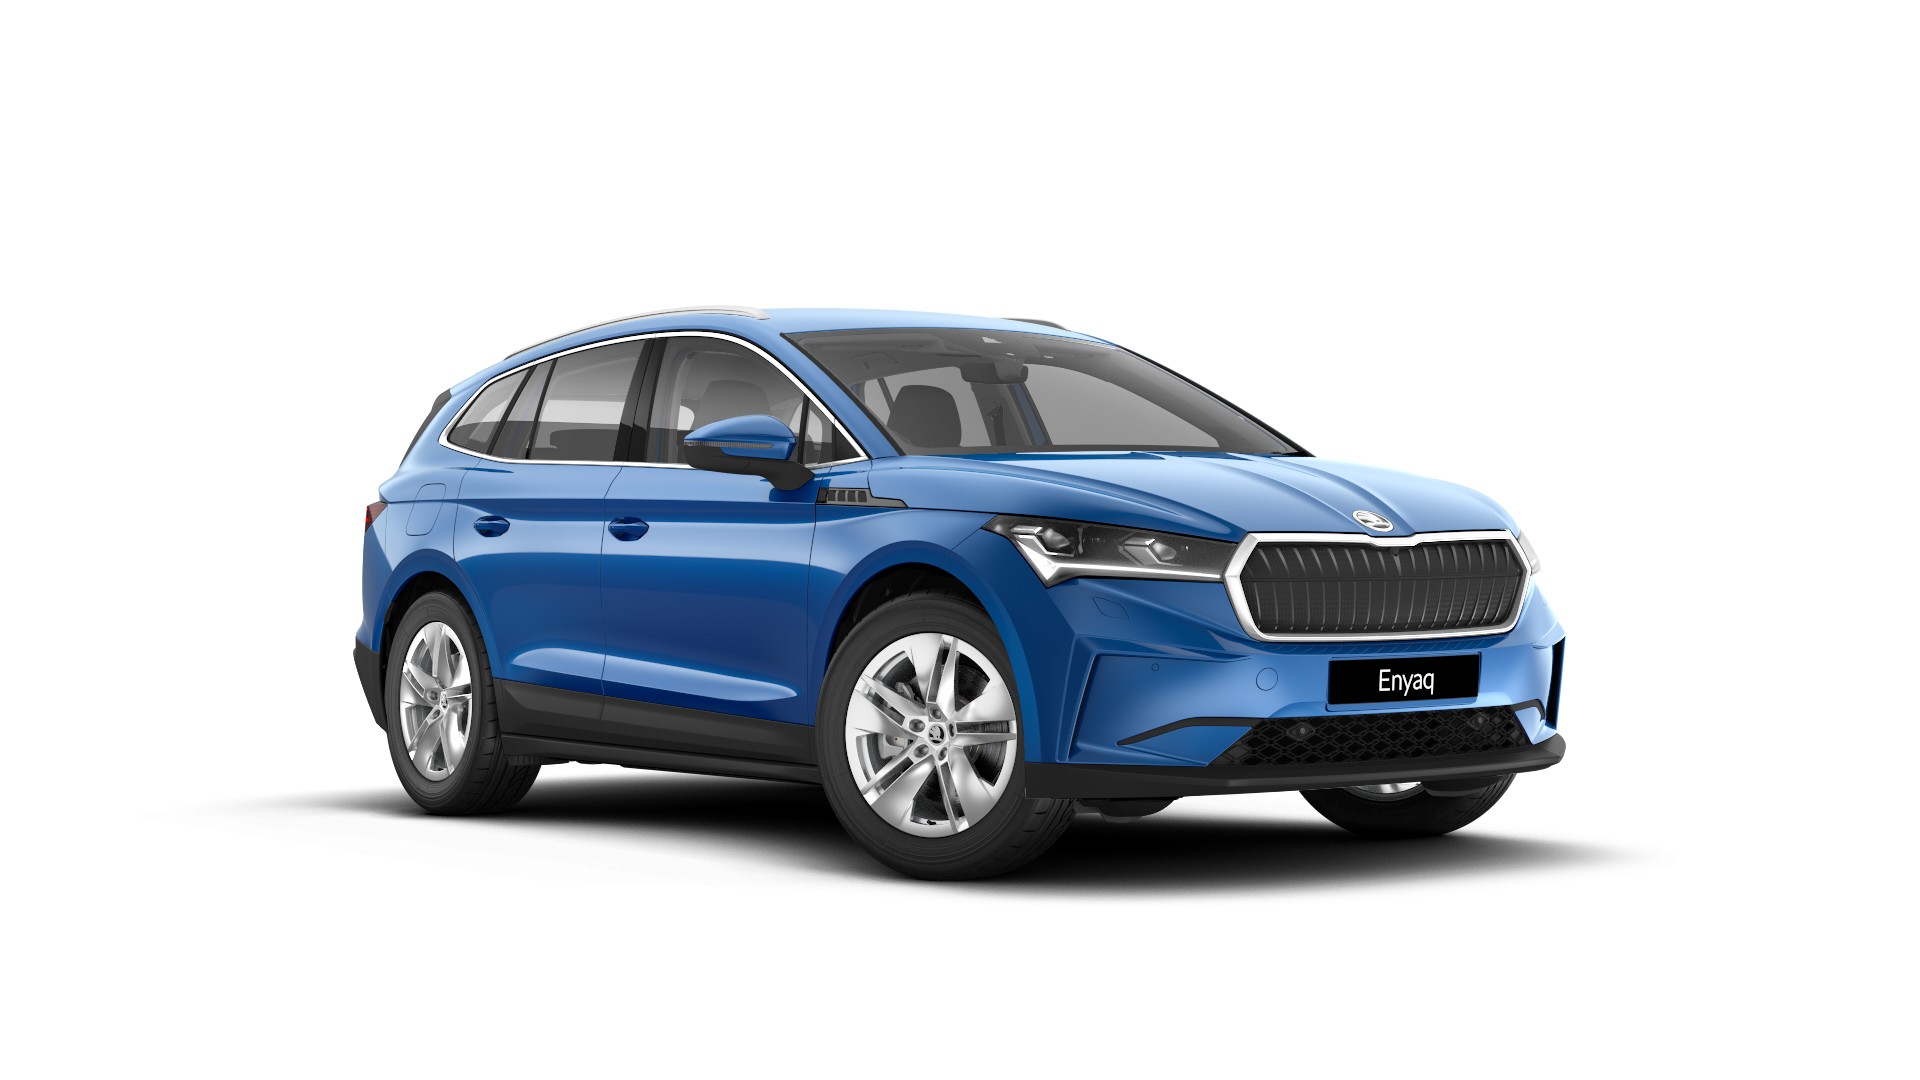 Why the Skoda Enyaq is a 5-star What Car? electric SUV